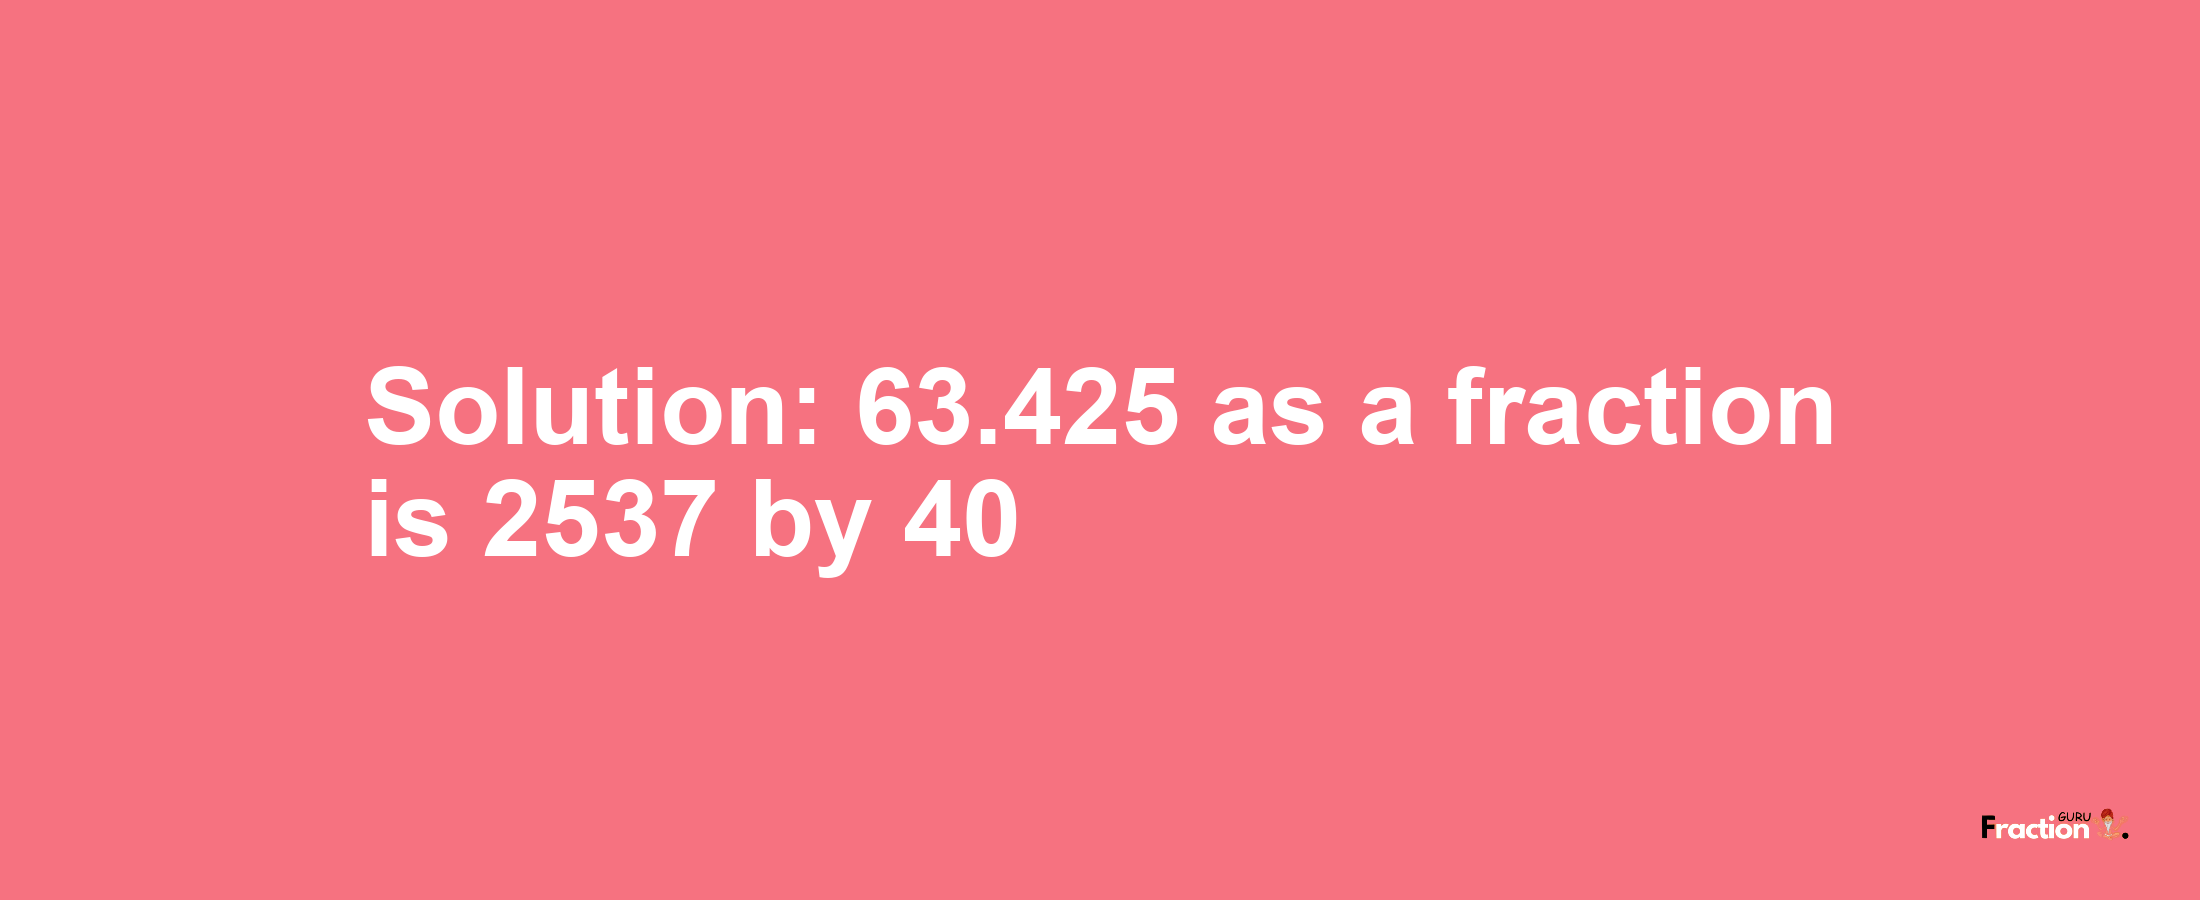 Solution:63.425 as a fraction is 2537/40